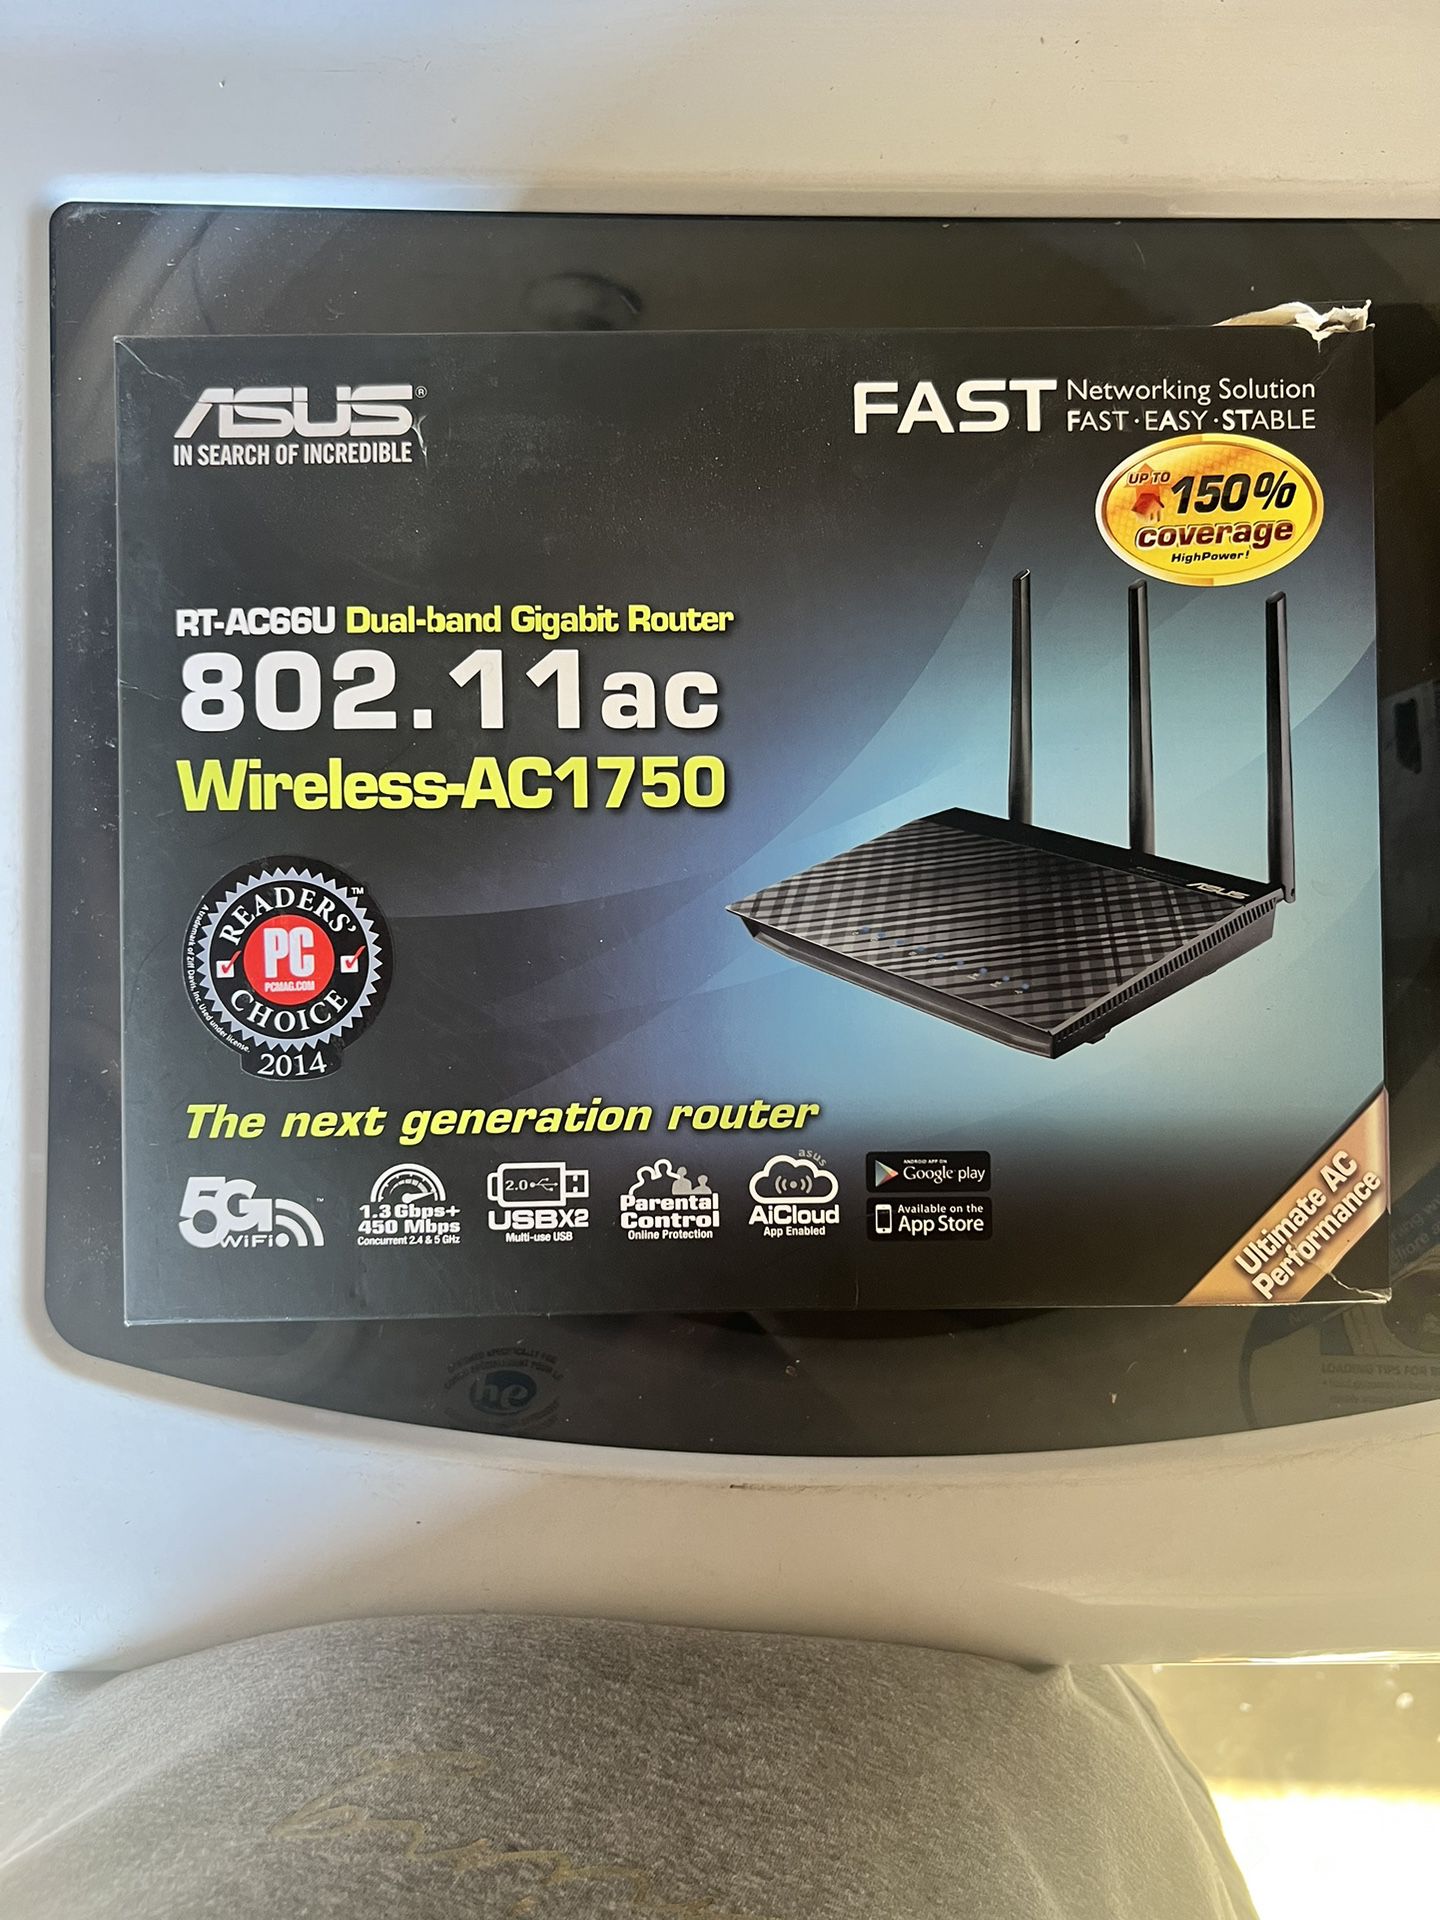 ASUS Wireless AC1750 RT-AC660 Router